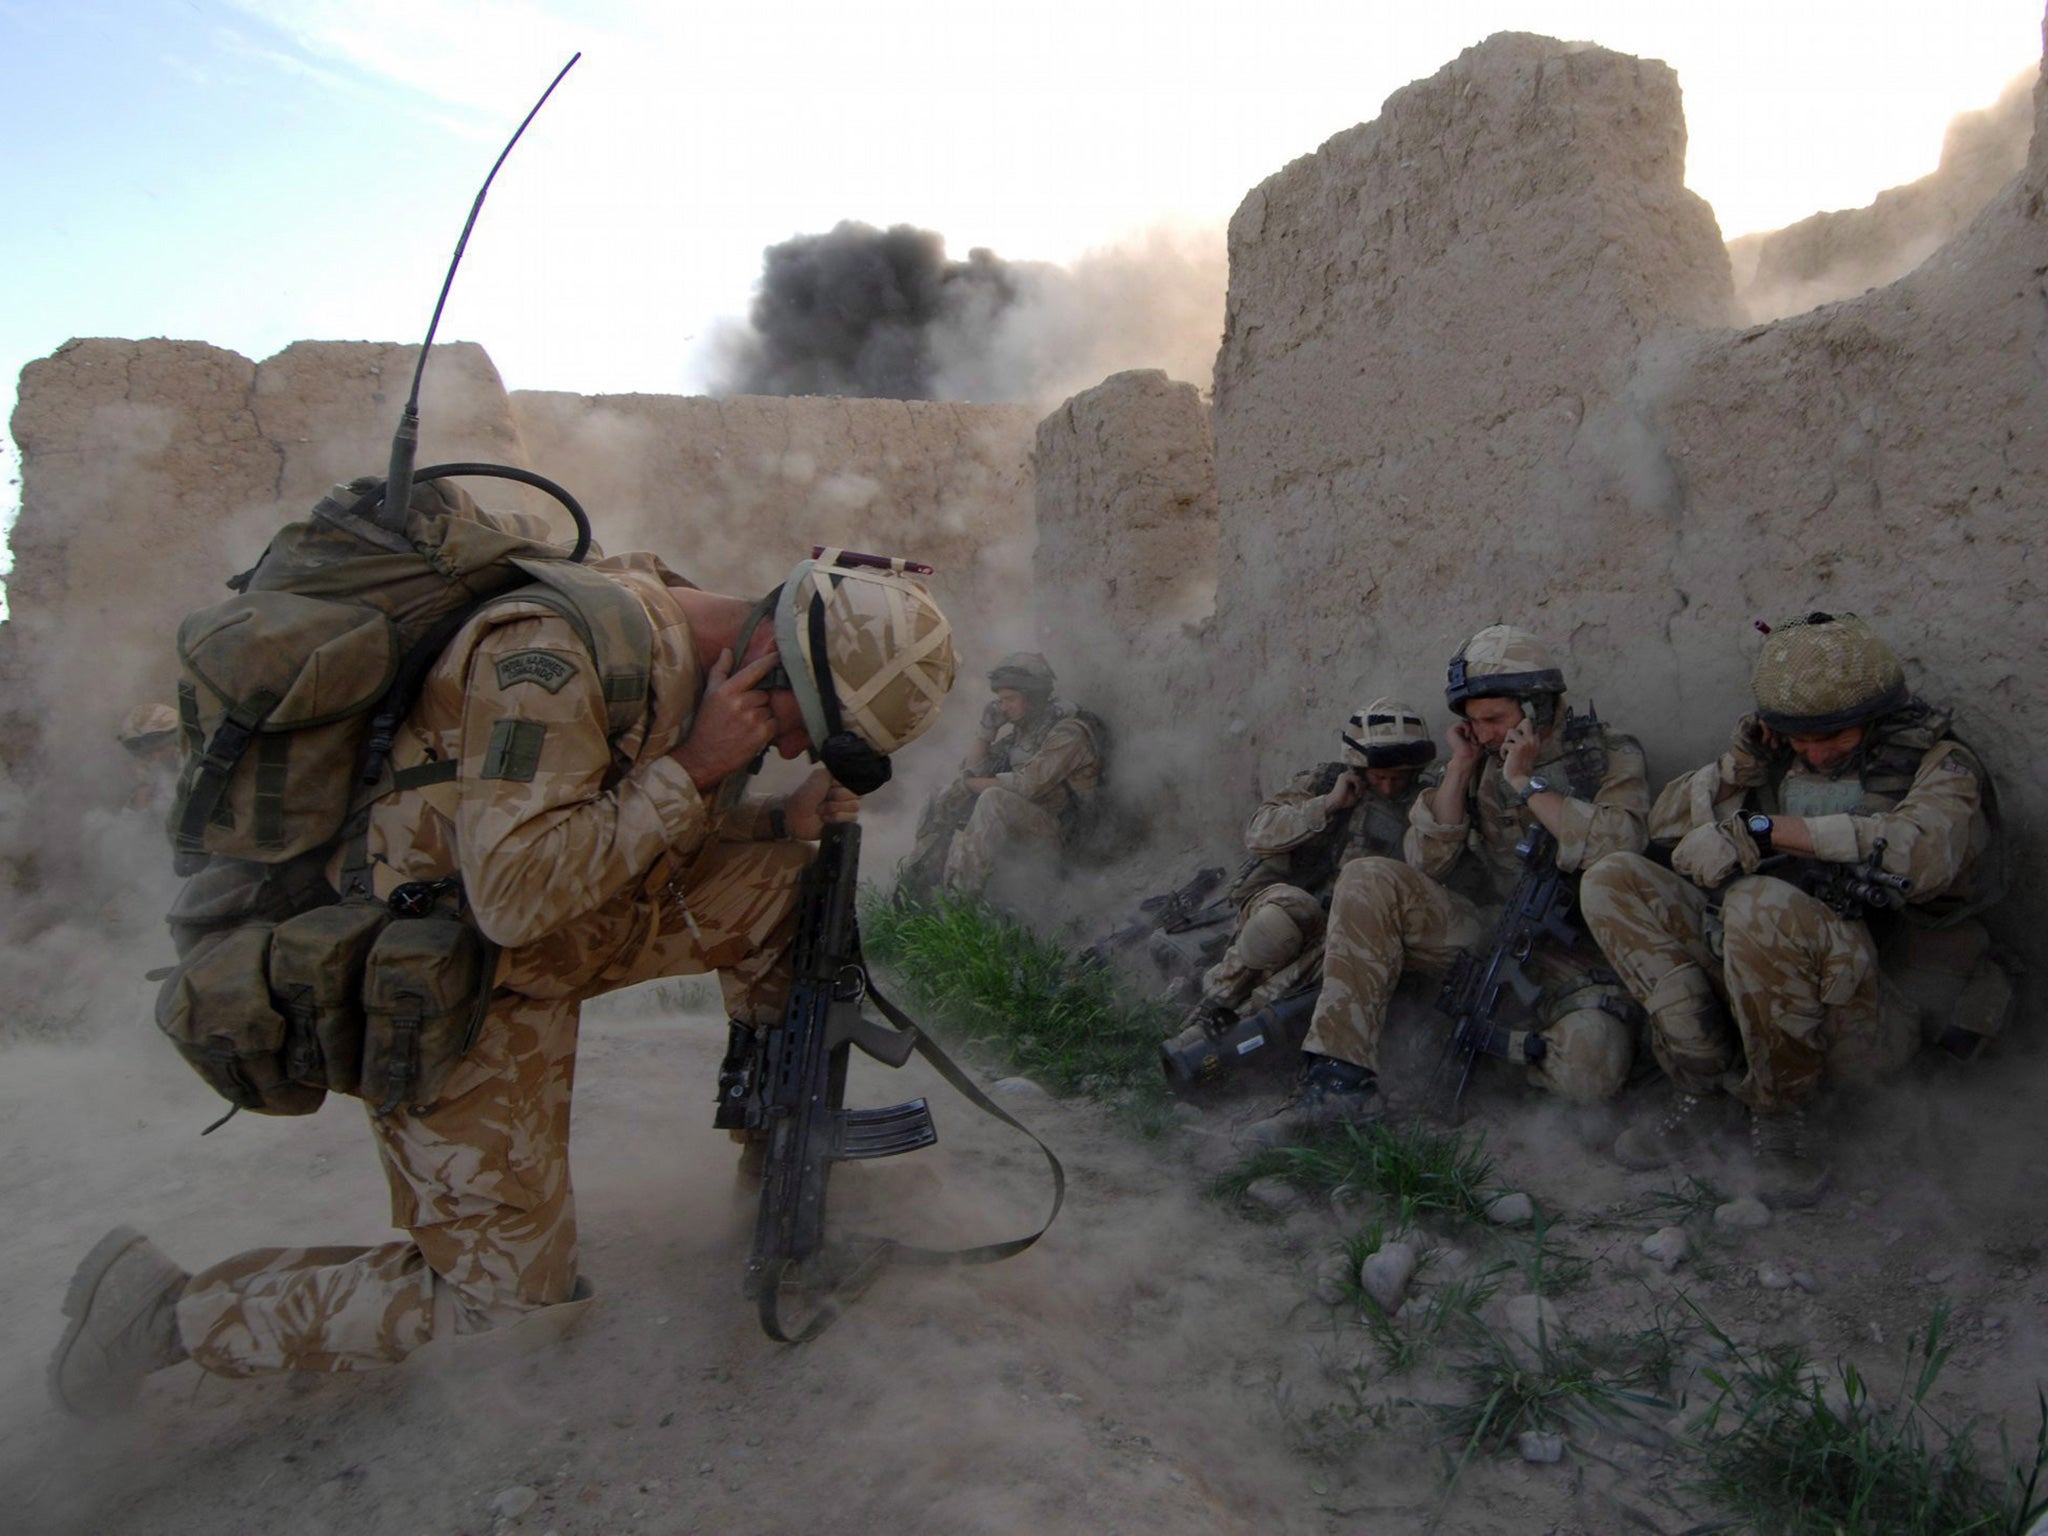 Members from J company 42 Commando Royal Marines launch an offensive in Sangin in 2007